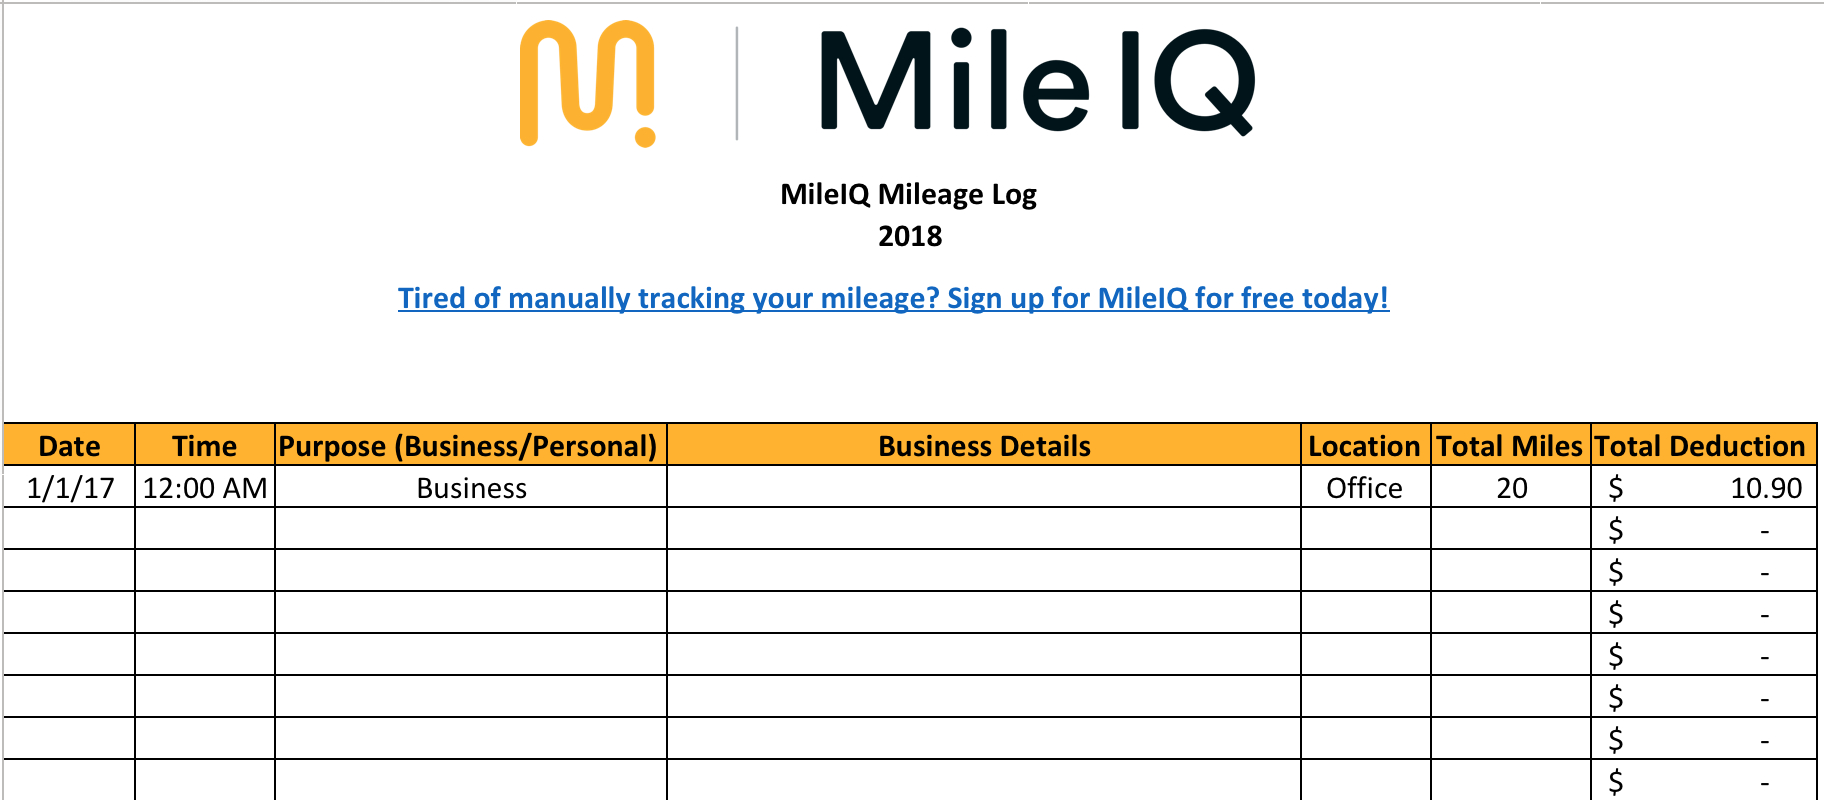 Business Mileage Spreadsheet Excel Regarding Free Mileage Log Template For Excel  Track Your Miles